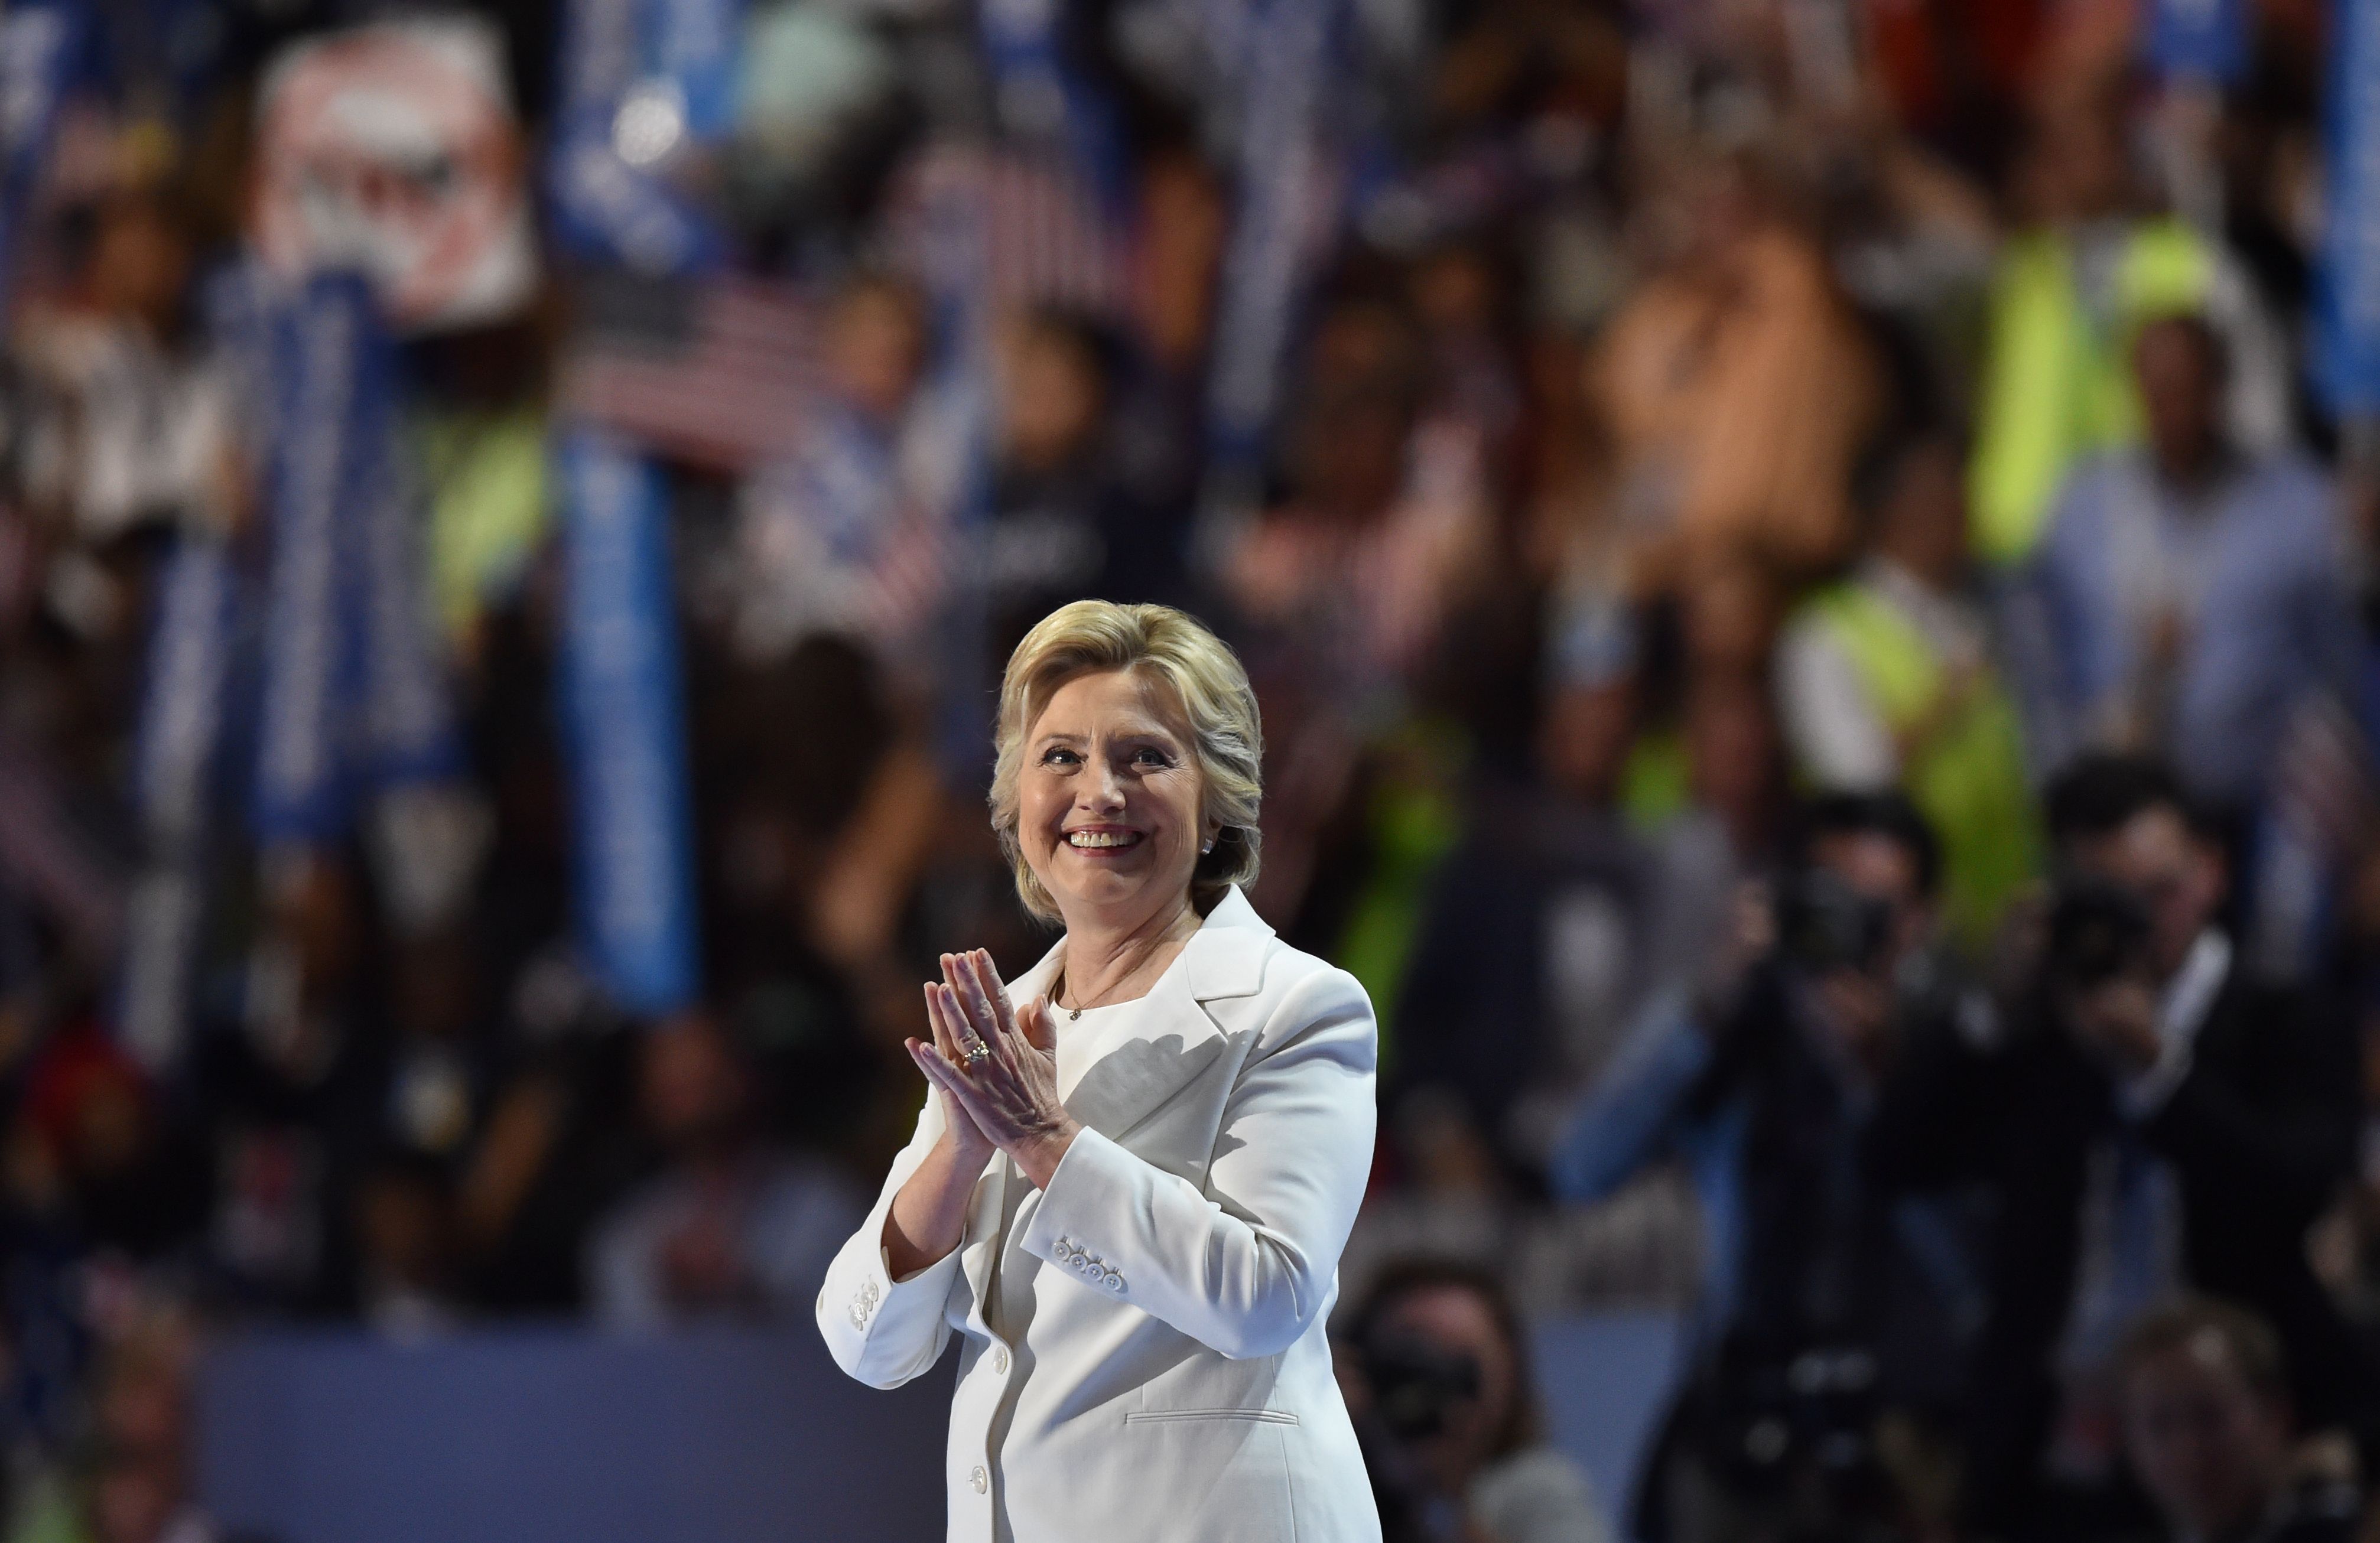 Presidential nominee Hillary Clinton gestures after the fourth and final day of the Democratic National Convention on July 28, 2016 in Philadelphia, Pennsylvania. 